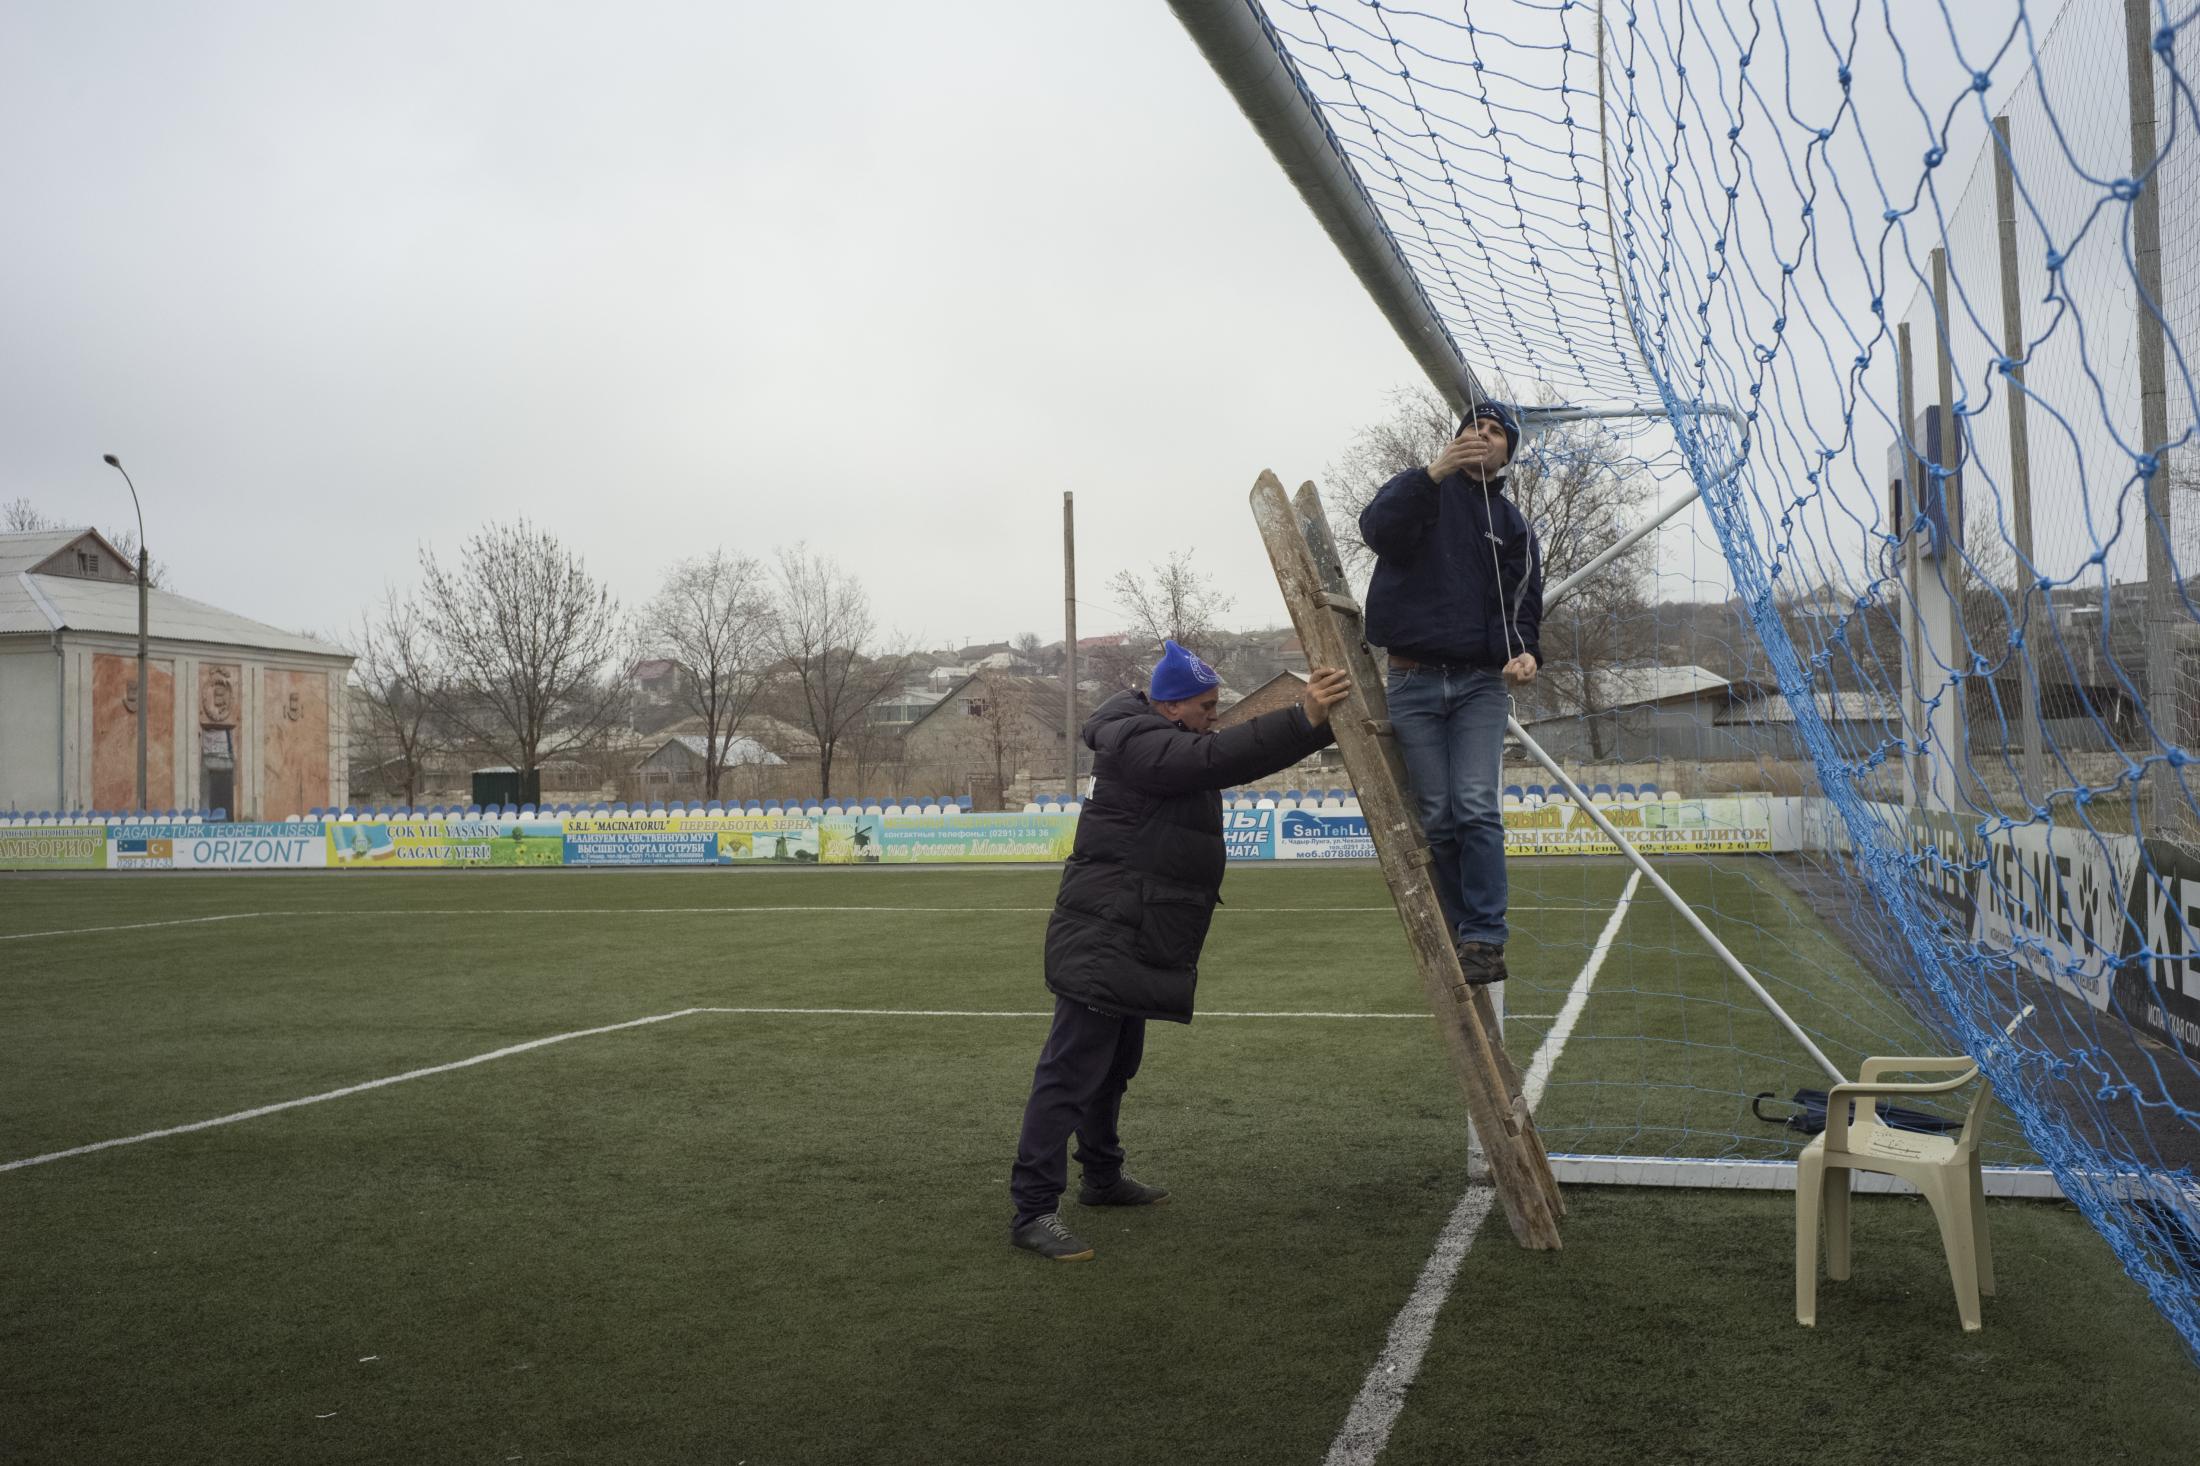 Republic of Moldova / Gagauzia / Cead&icirc;r-Lunga / The equipment manager of FC Saxan is holding the ladder to help repair the goal, one day before the game. He was born in Gagauzia and is very proud of his origin: he believes sport and football can help make the Gagauzian flag more seen and help making the local culture better respected and recognised in the Moldovan state system.